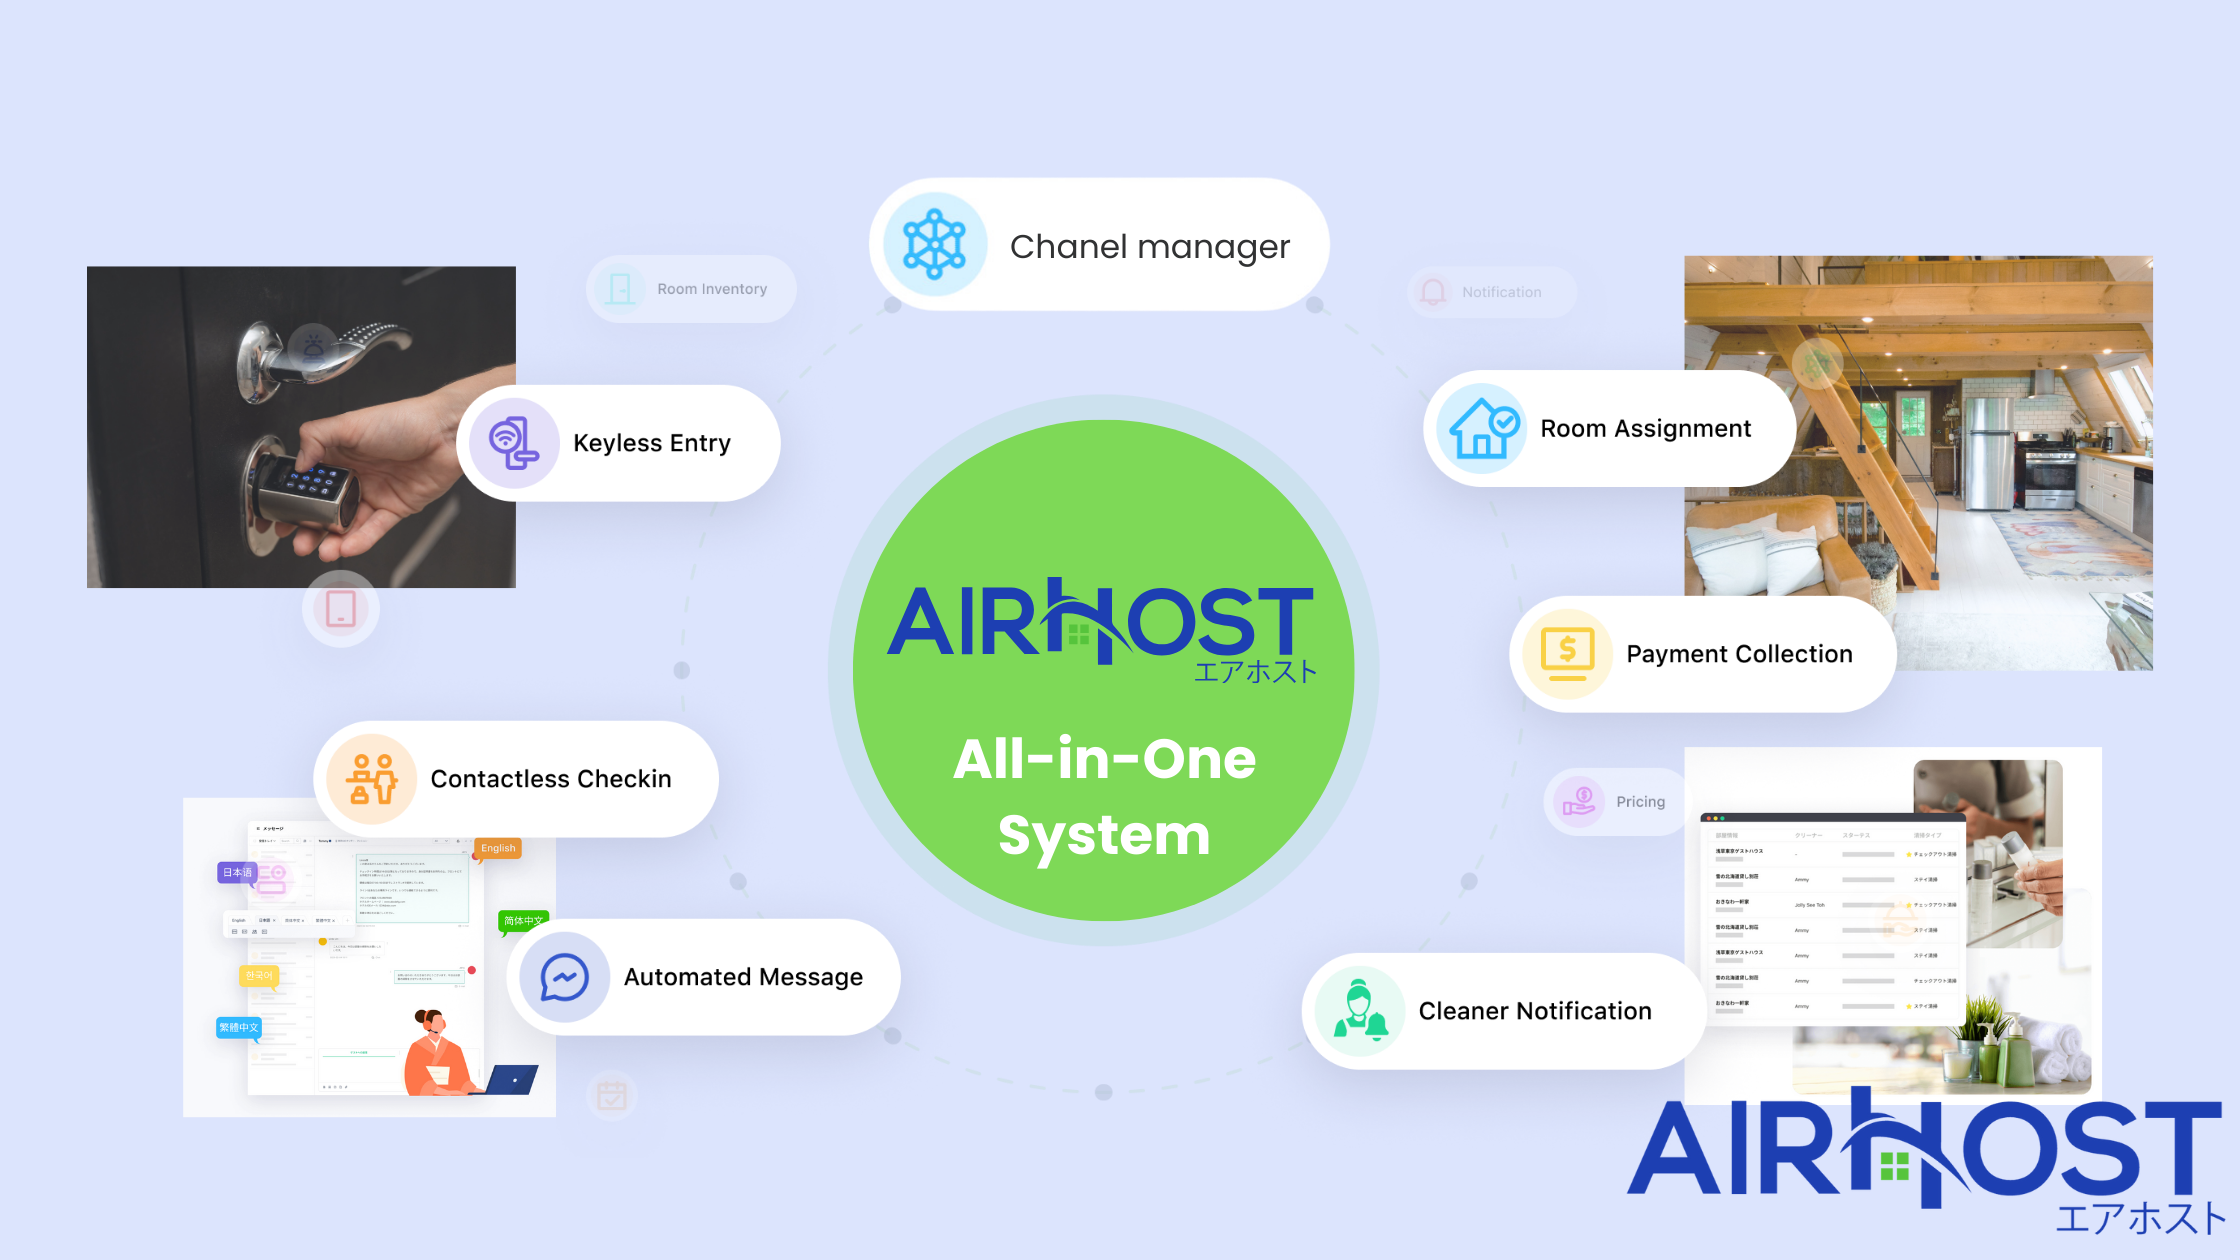 This is "AirHost"